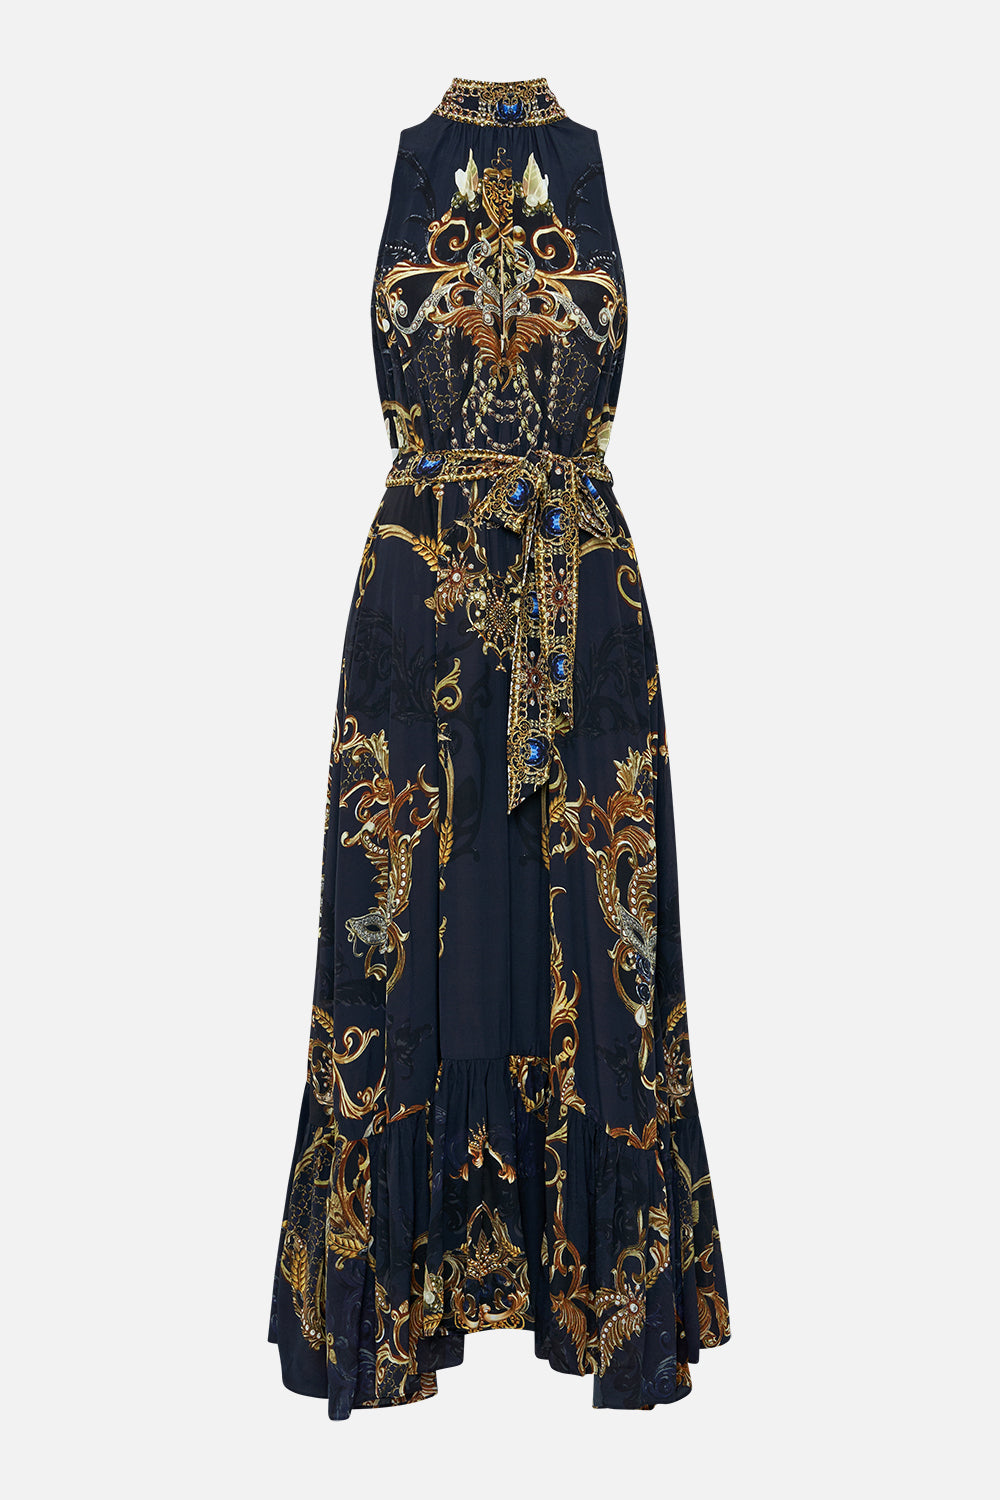 Product view of CAMILLA silk maxi dress in Moonlight Melodies print